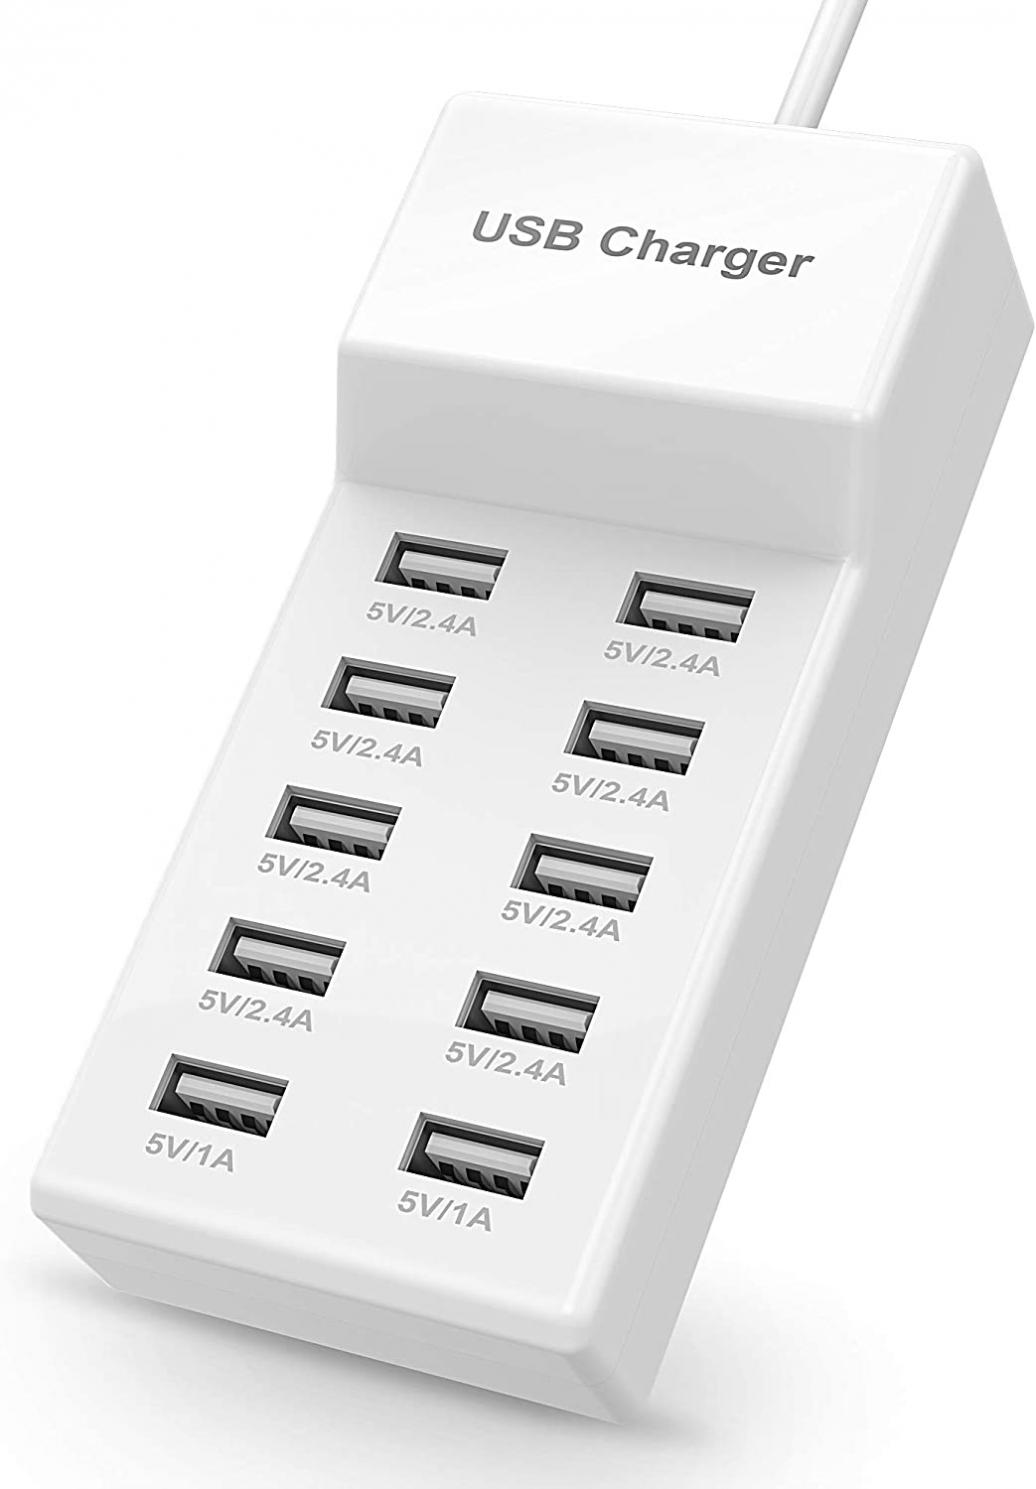 USB Charger USB Charging Station with Rapid Charging Auto Detect Technology Safety Guaranteed 10-Port Family-Sized Smart USB Ports for Multiple Devices Smart Phone Tablet Laptop Computer